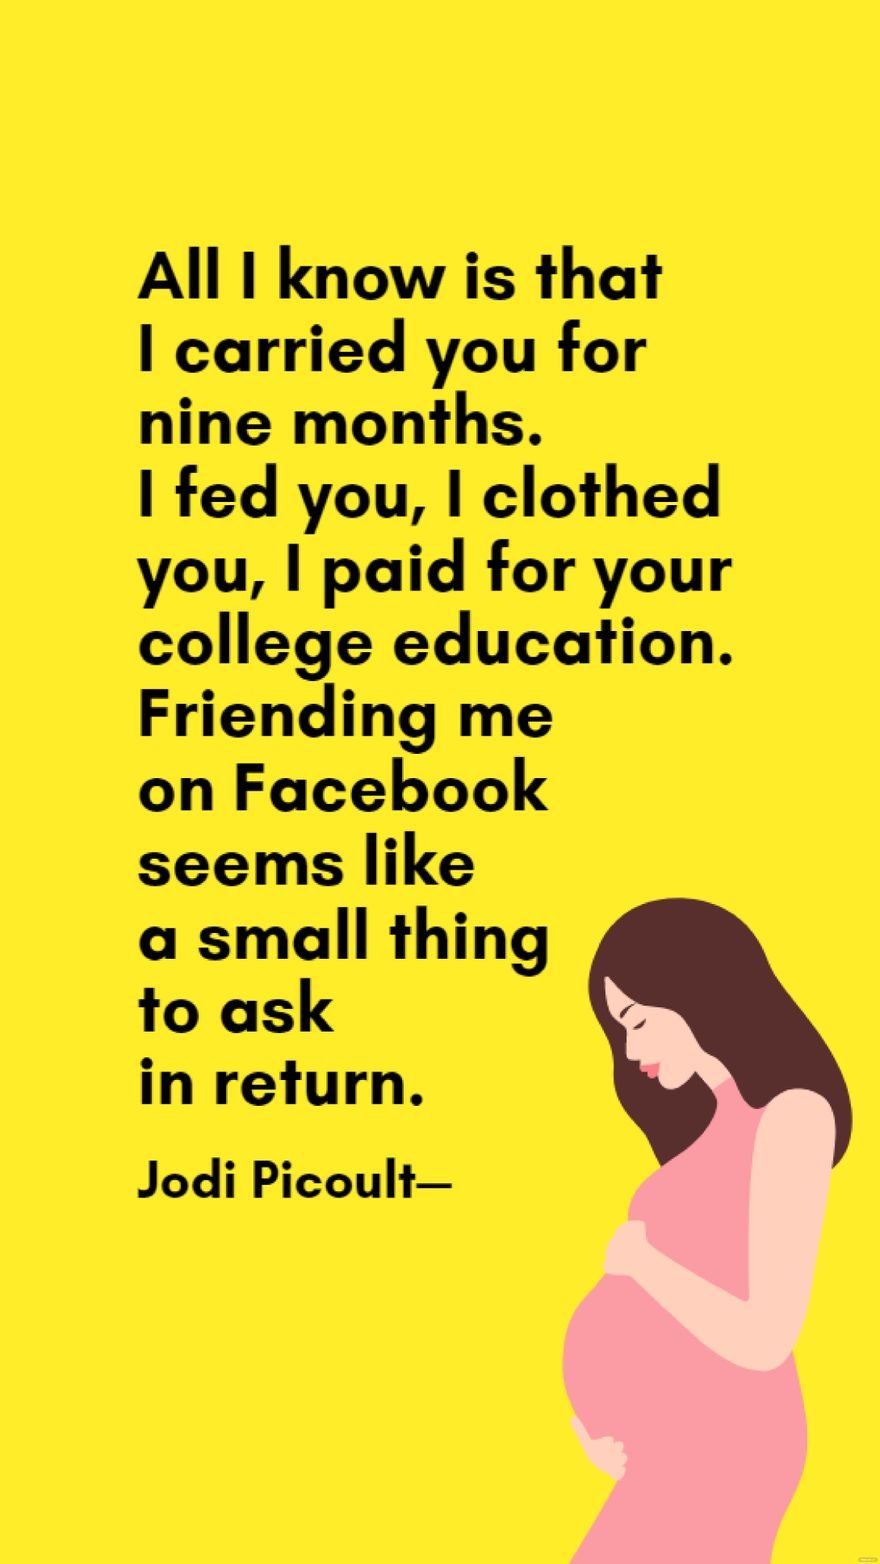 Jodi Picoult - All I know is that I carried you for nine months. I fed you, I clothed you, I paid for your college education. Friending me on Facebook seems like a small thing to ask in return. in JPG